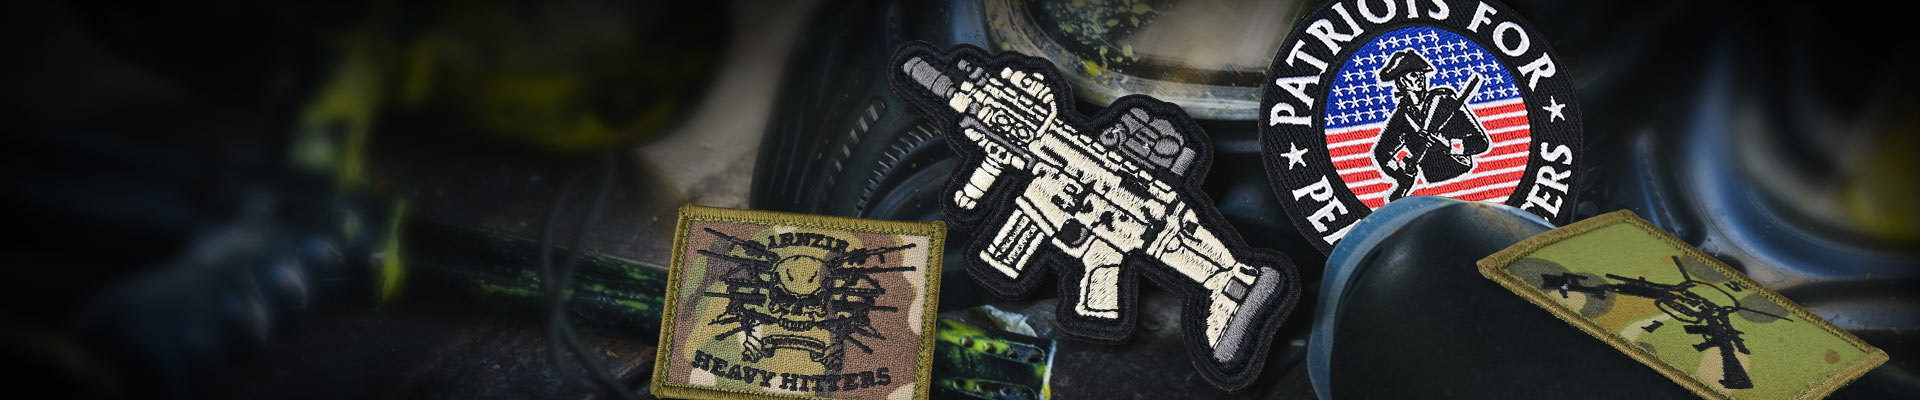 Brugerdefinerede Airsoft Patches